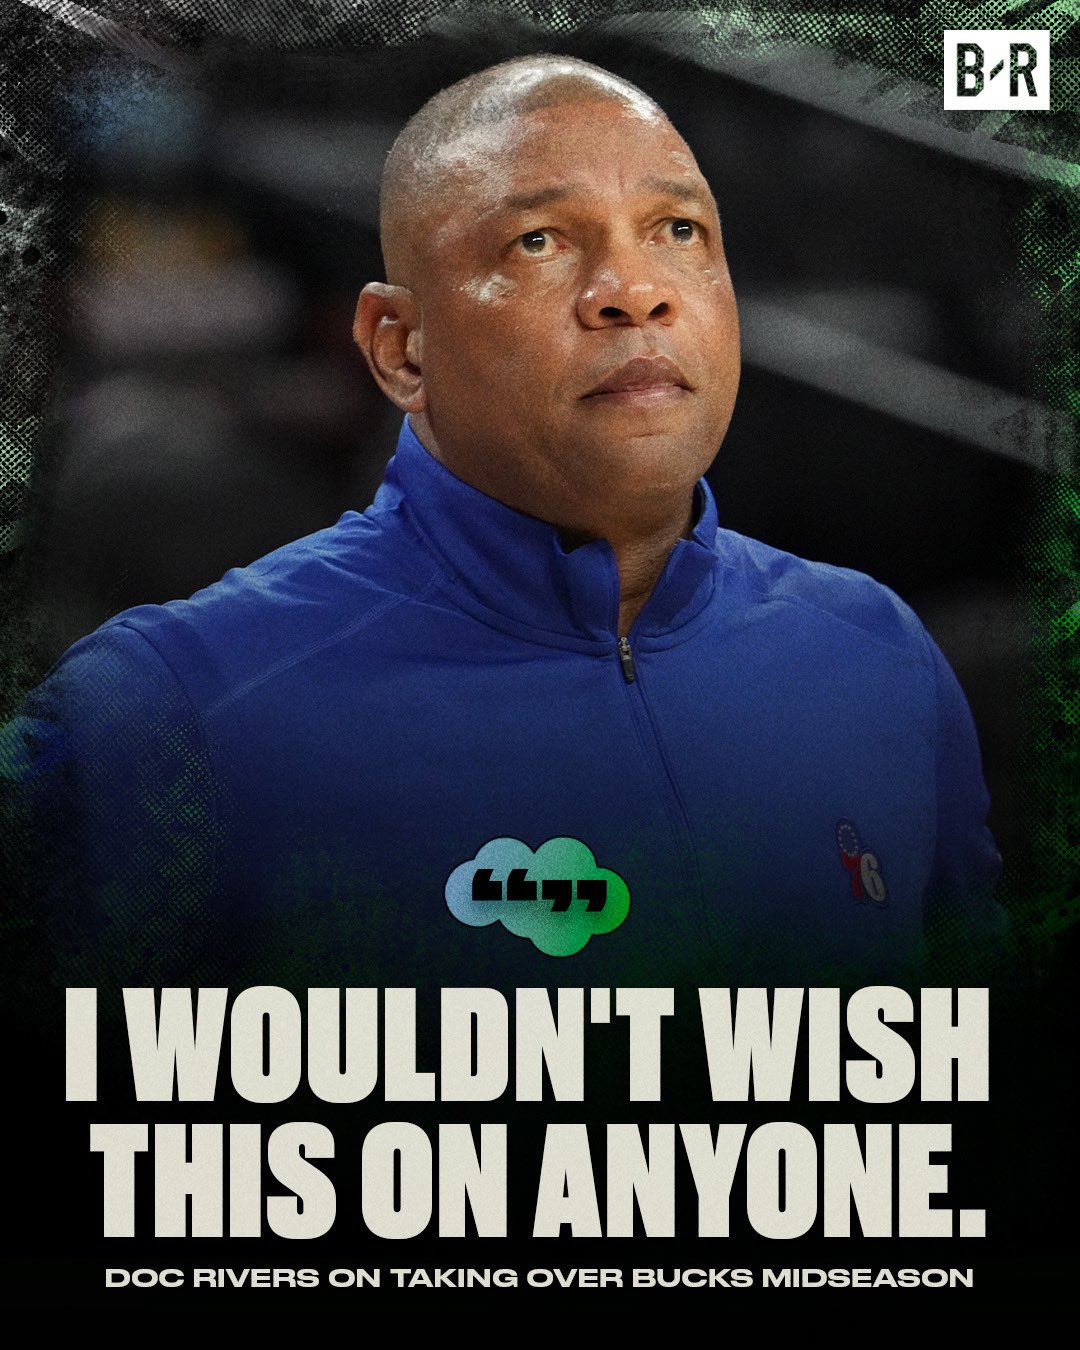 Steve Arionus on X: Doc Rivers saying “I wouldn't wish this on anyone” as  he gleefully takes over for Adrian Griffin. https://t.co/uLfGdRJrJt / X